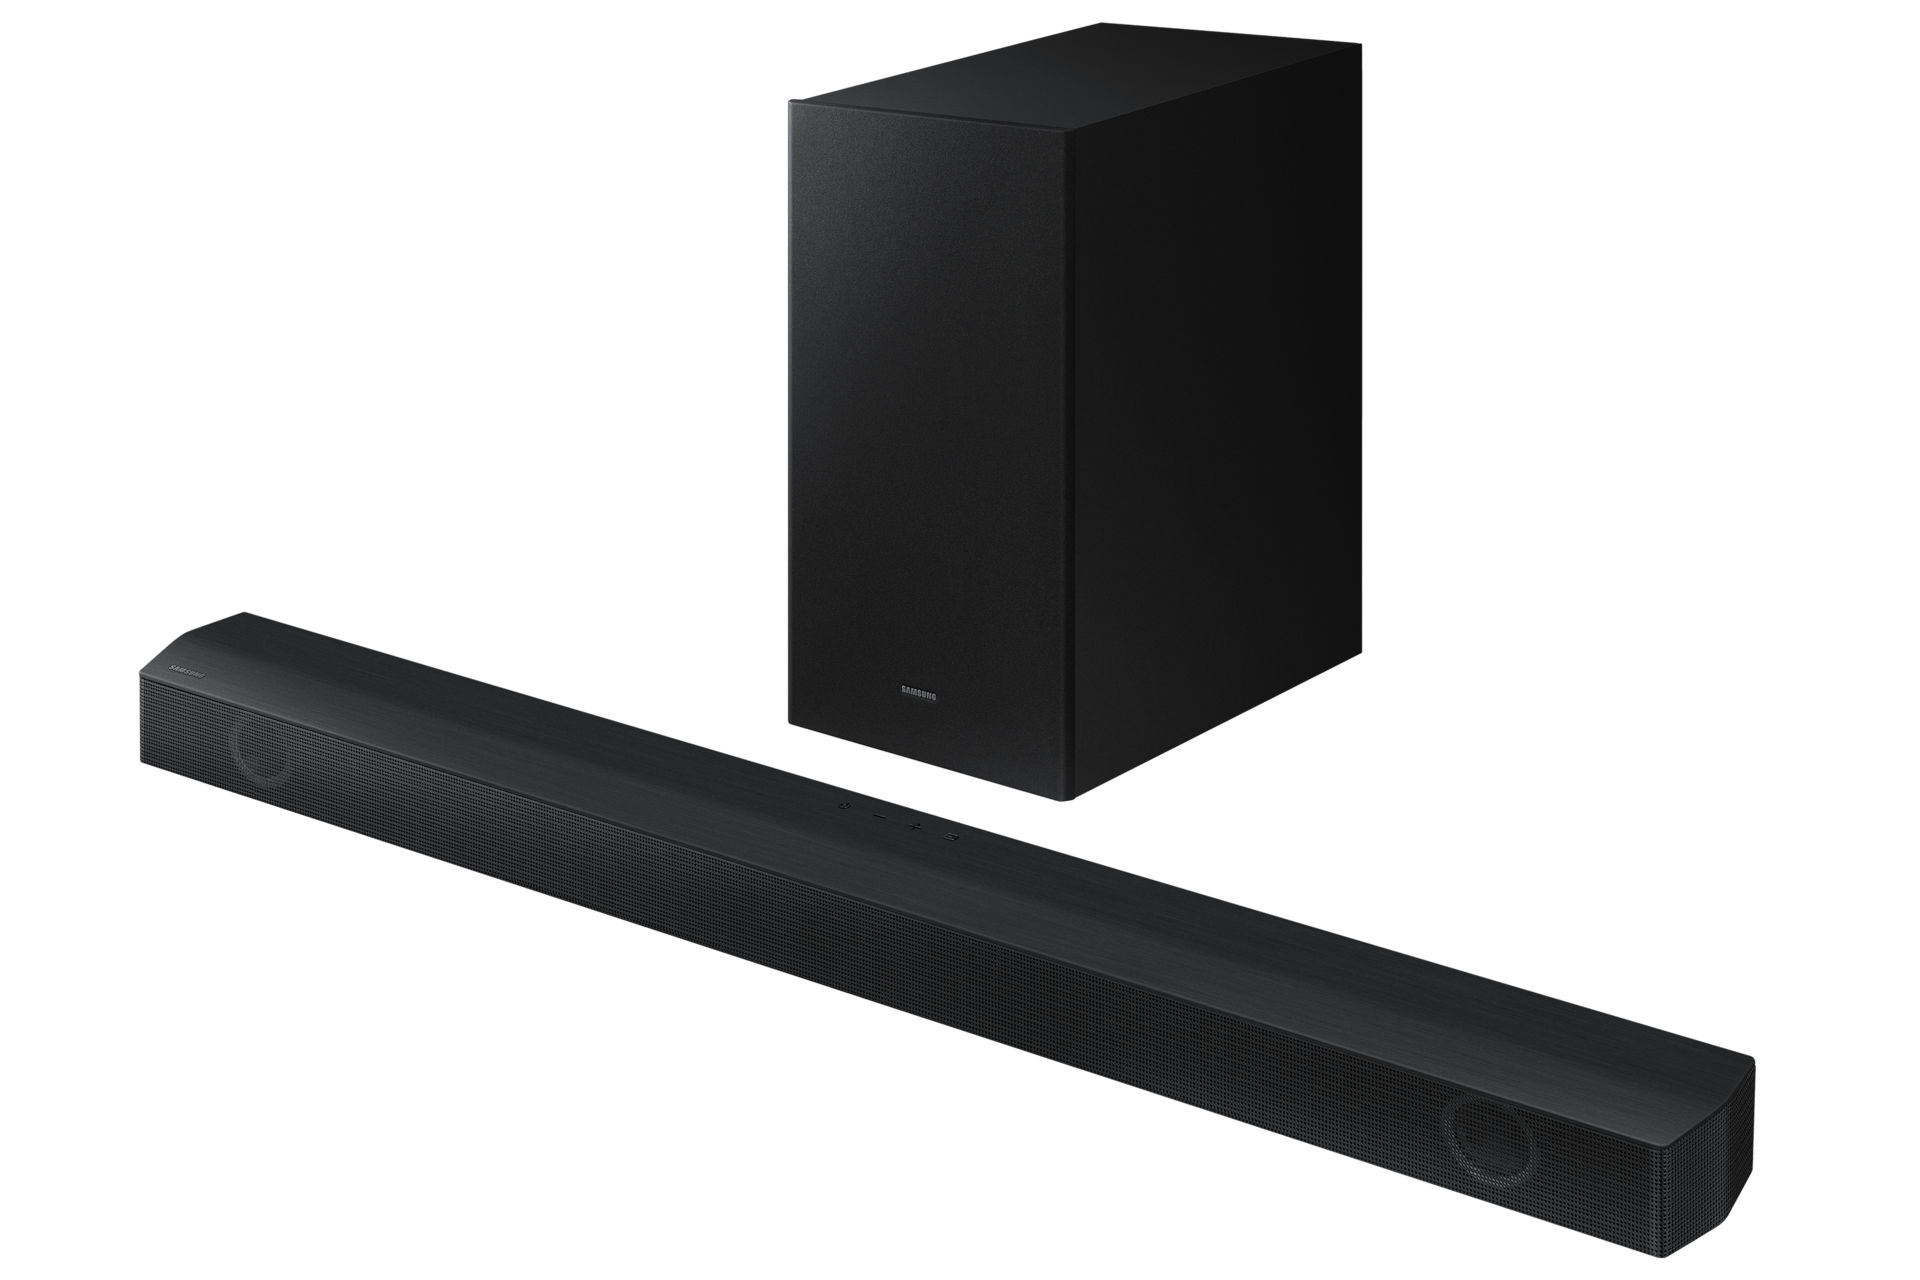 Samsung B550 2.1ch 410W Soundbar with Wireless Subwoofer Bass Boost Game Mode and Virtual DTS:X in Black